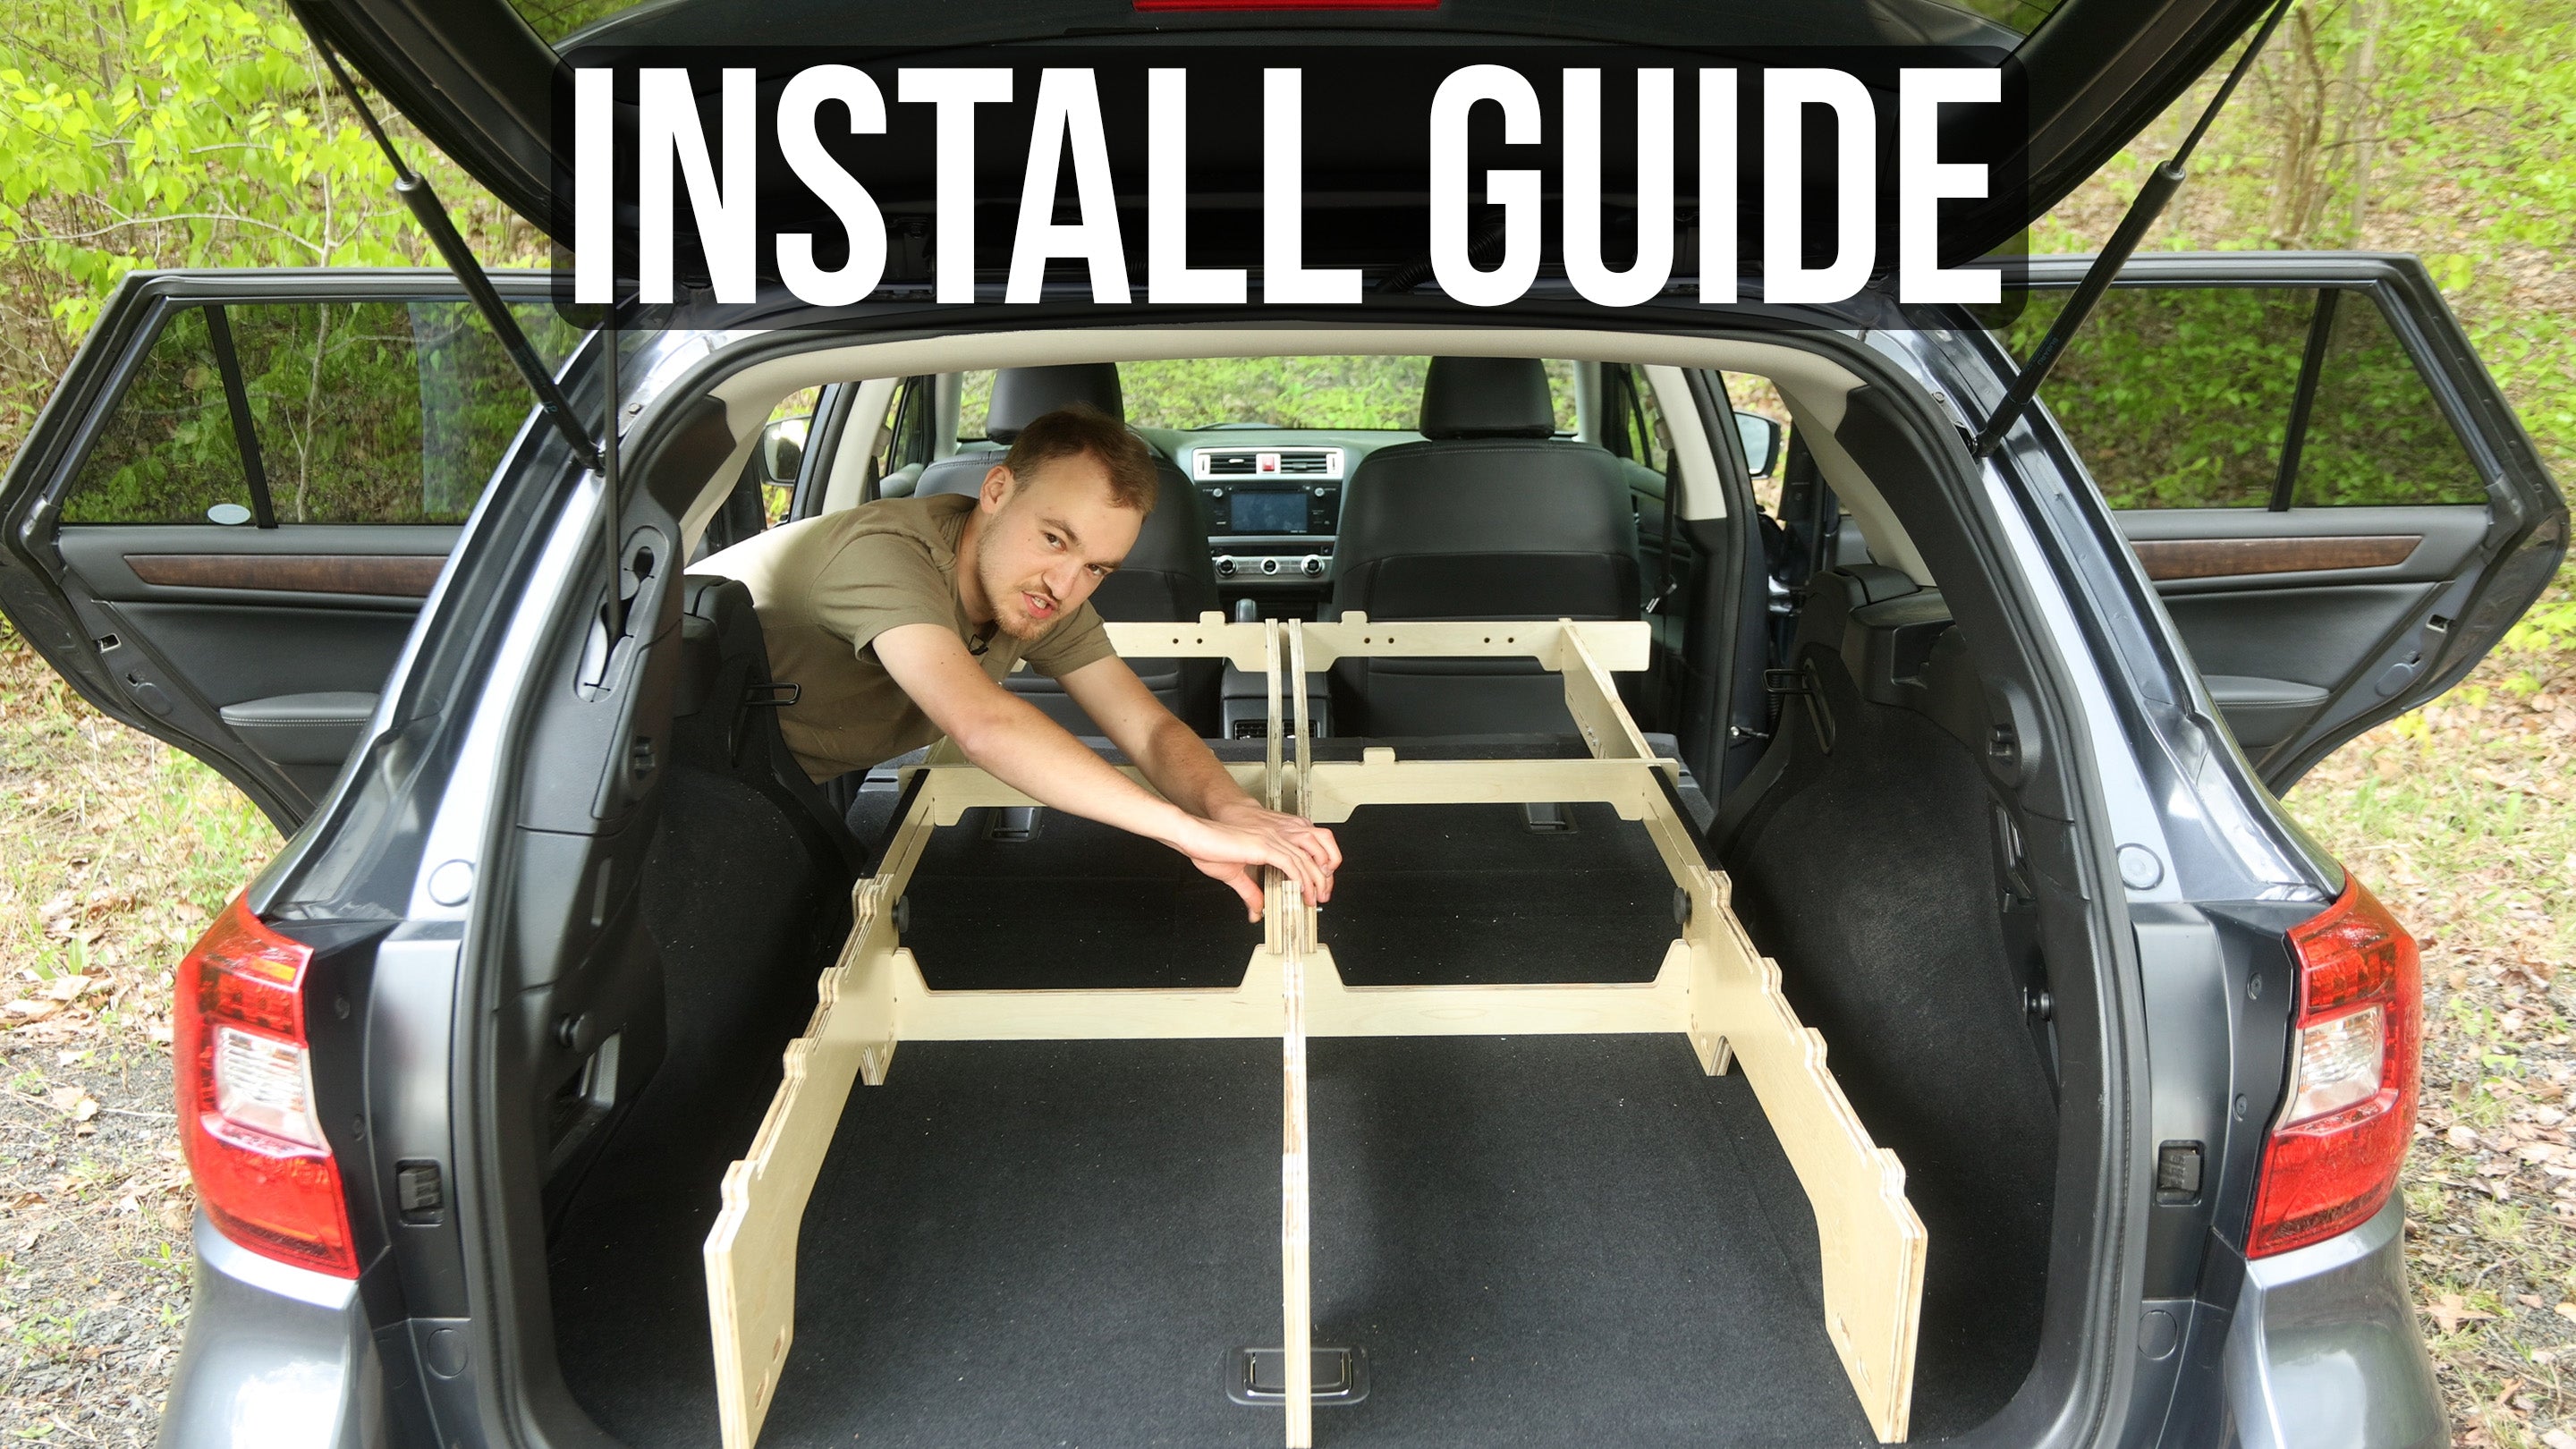 Load video: Watch this this simple install guide to assemble your CarToCamp Sleeping Platform and get ready to go camping!